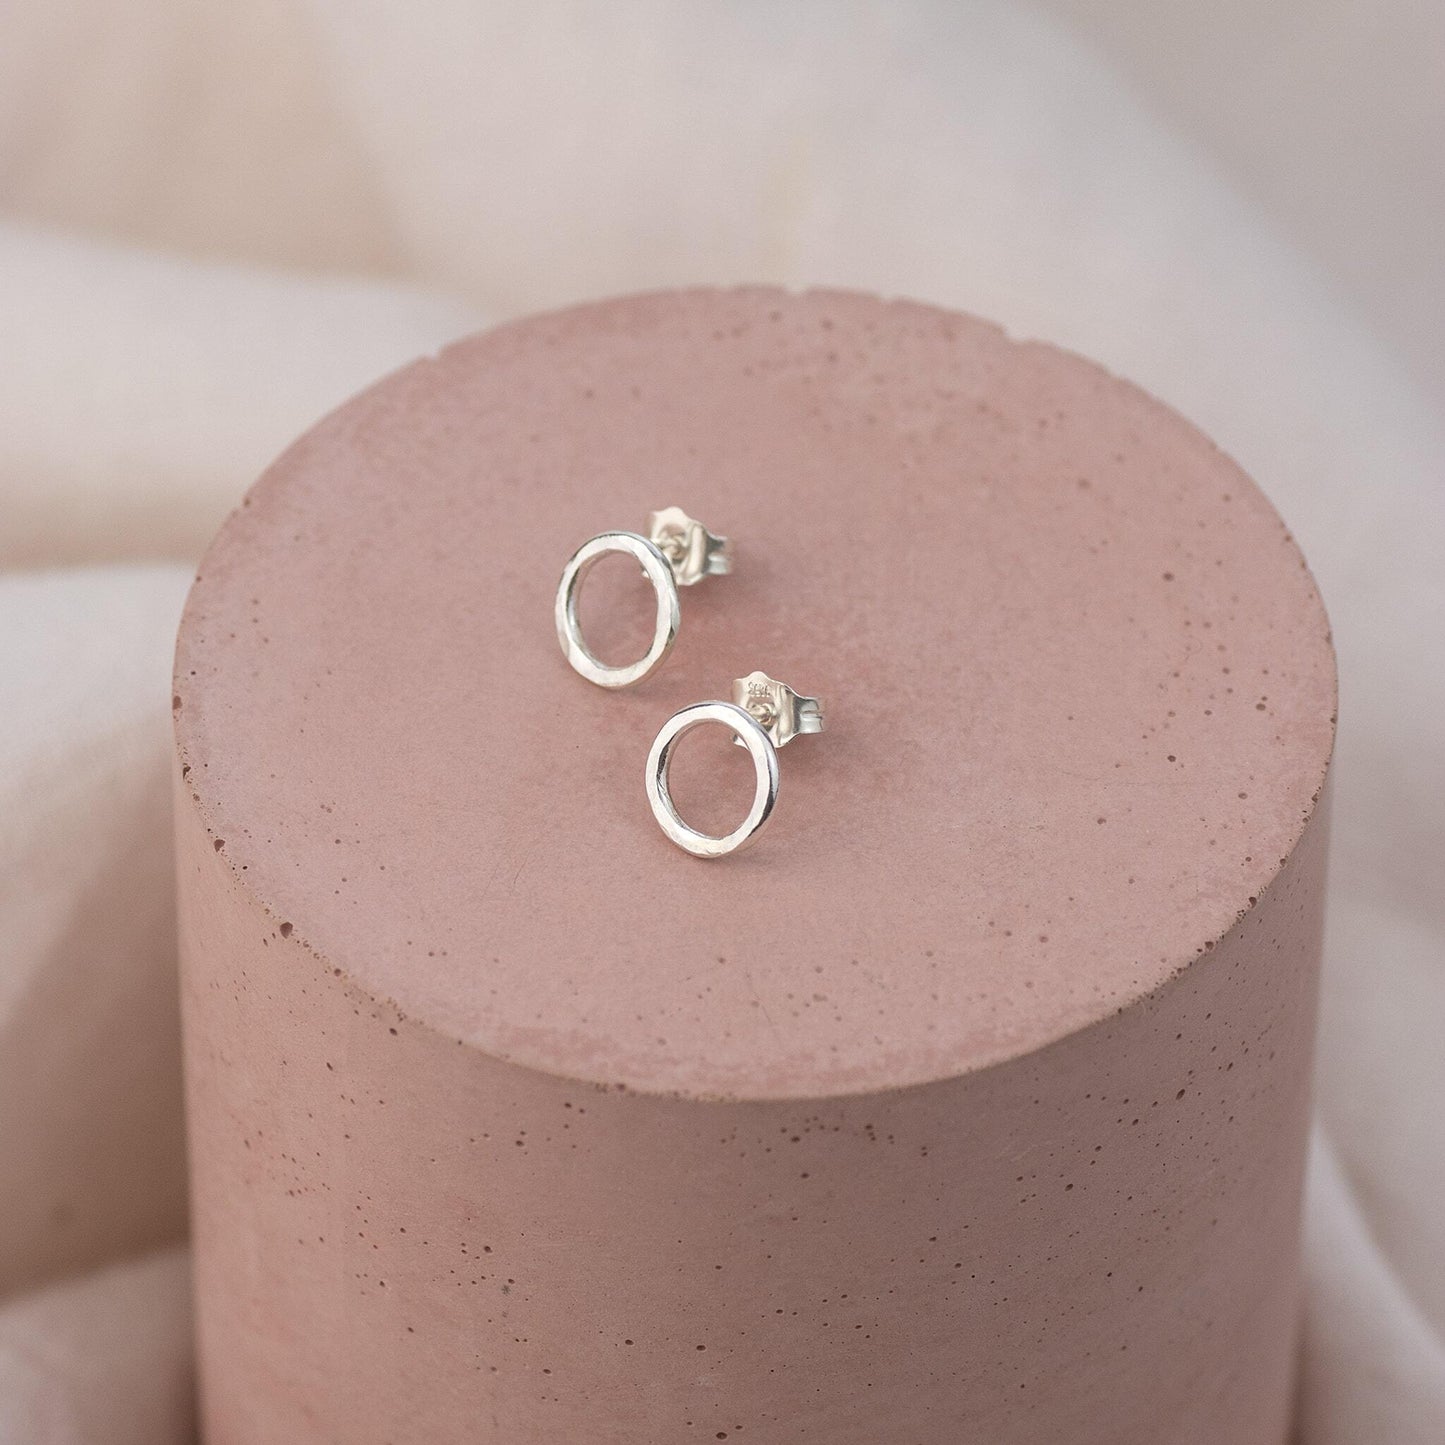 Tiny Silver Halo Stud Earrings - Forever Encircled With Love